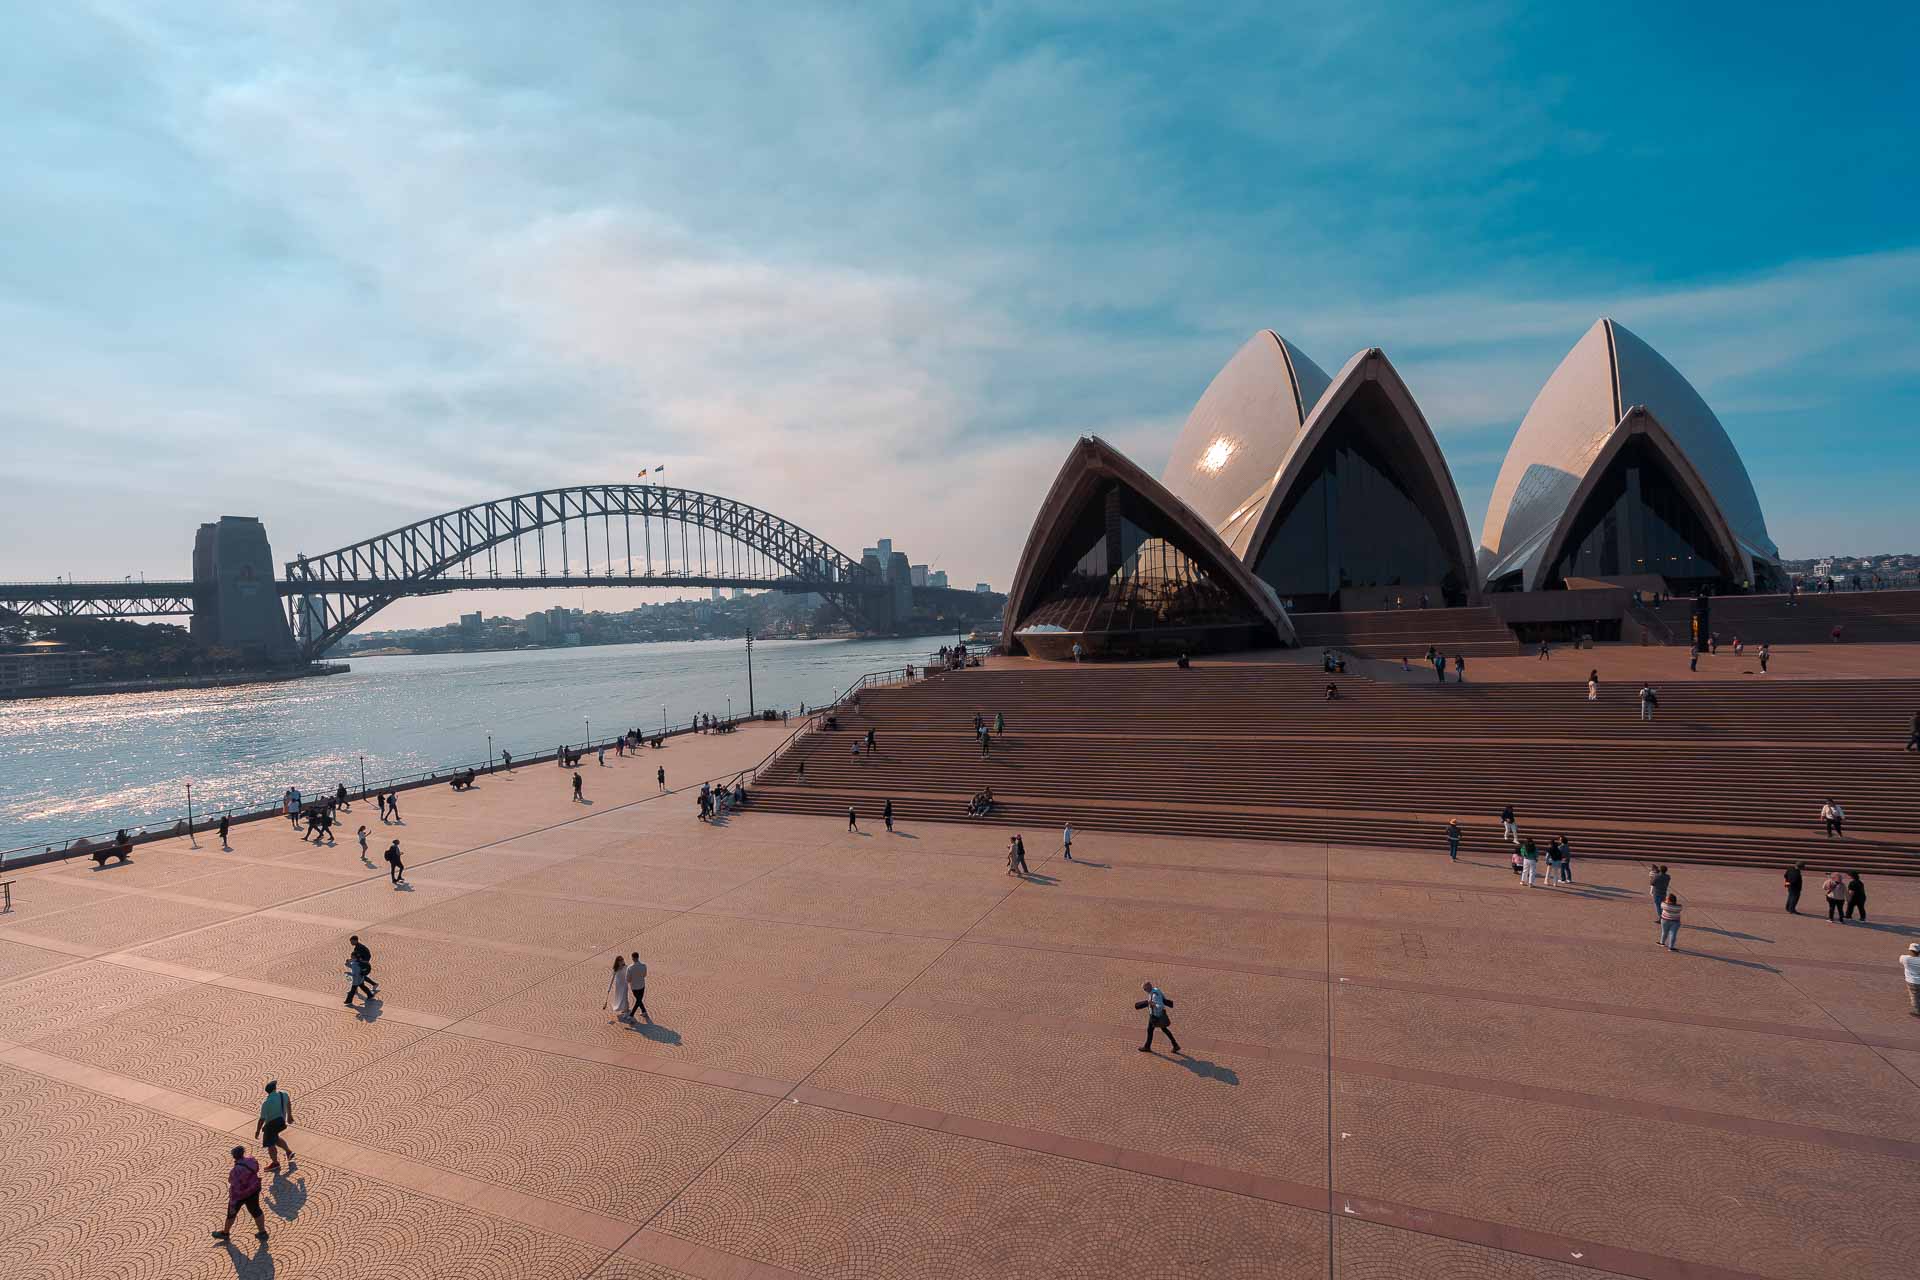 Overview of the Opera House and the Sydney Harbour